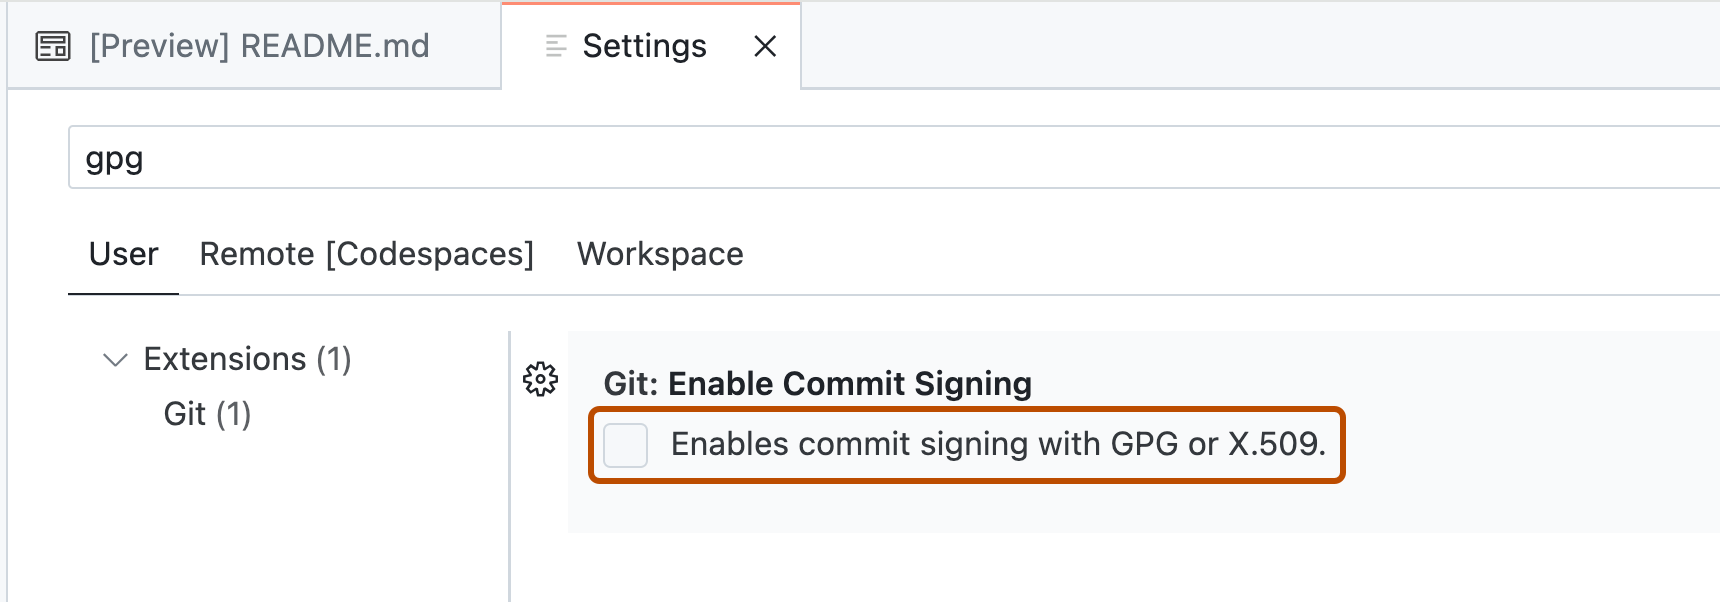 Screenshot of the "User" settings tab. A deselected checkbox, labeled "Enables commit signing with GPG or X.509," is highlighted with an orange outline.